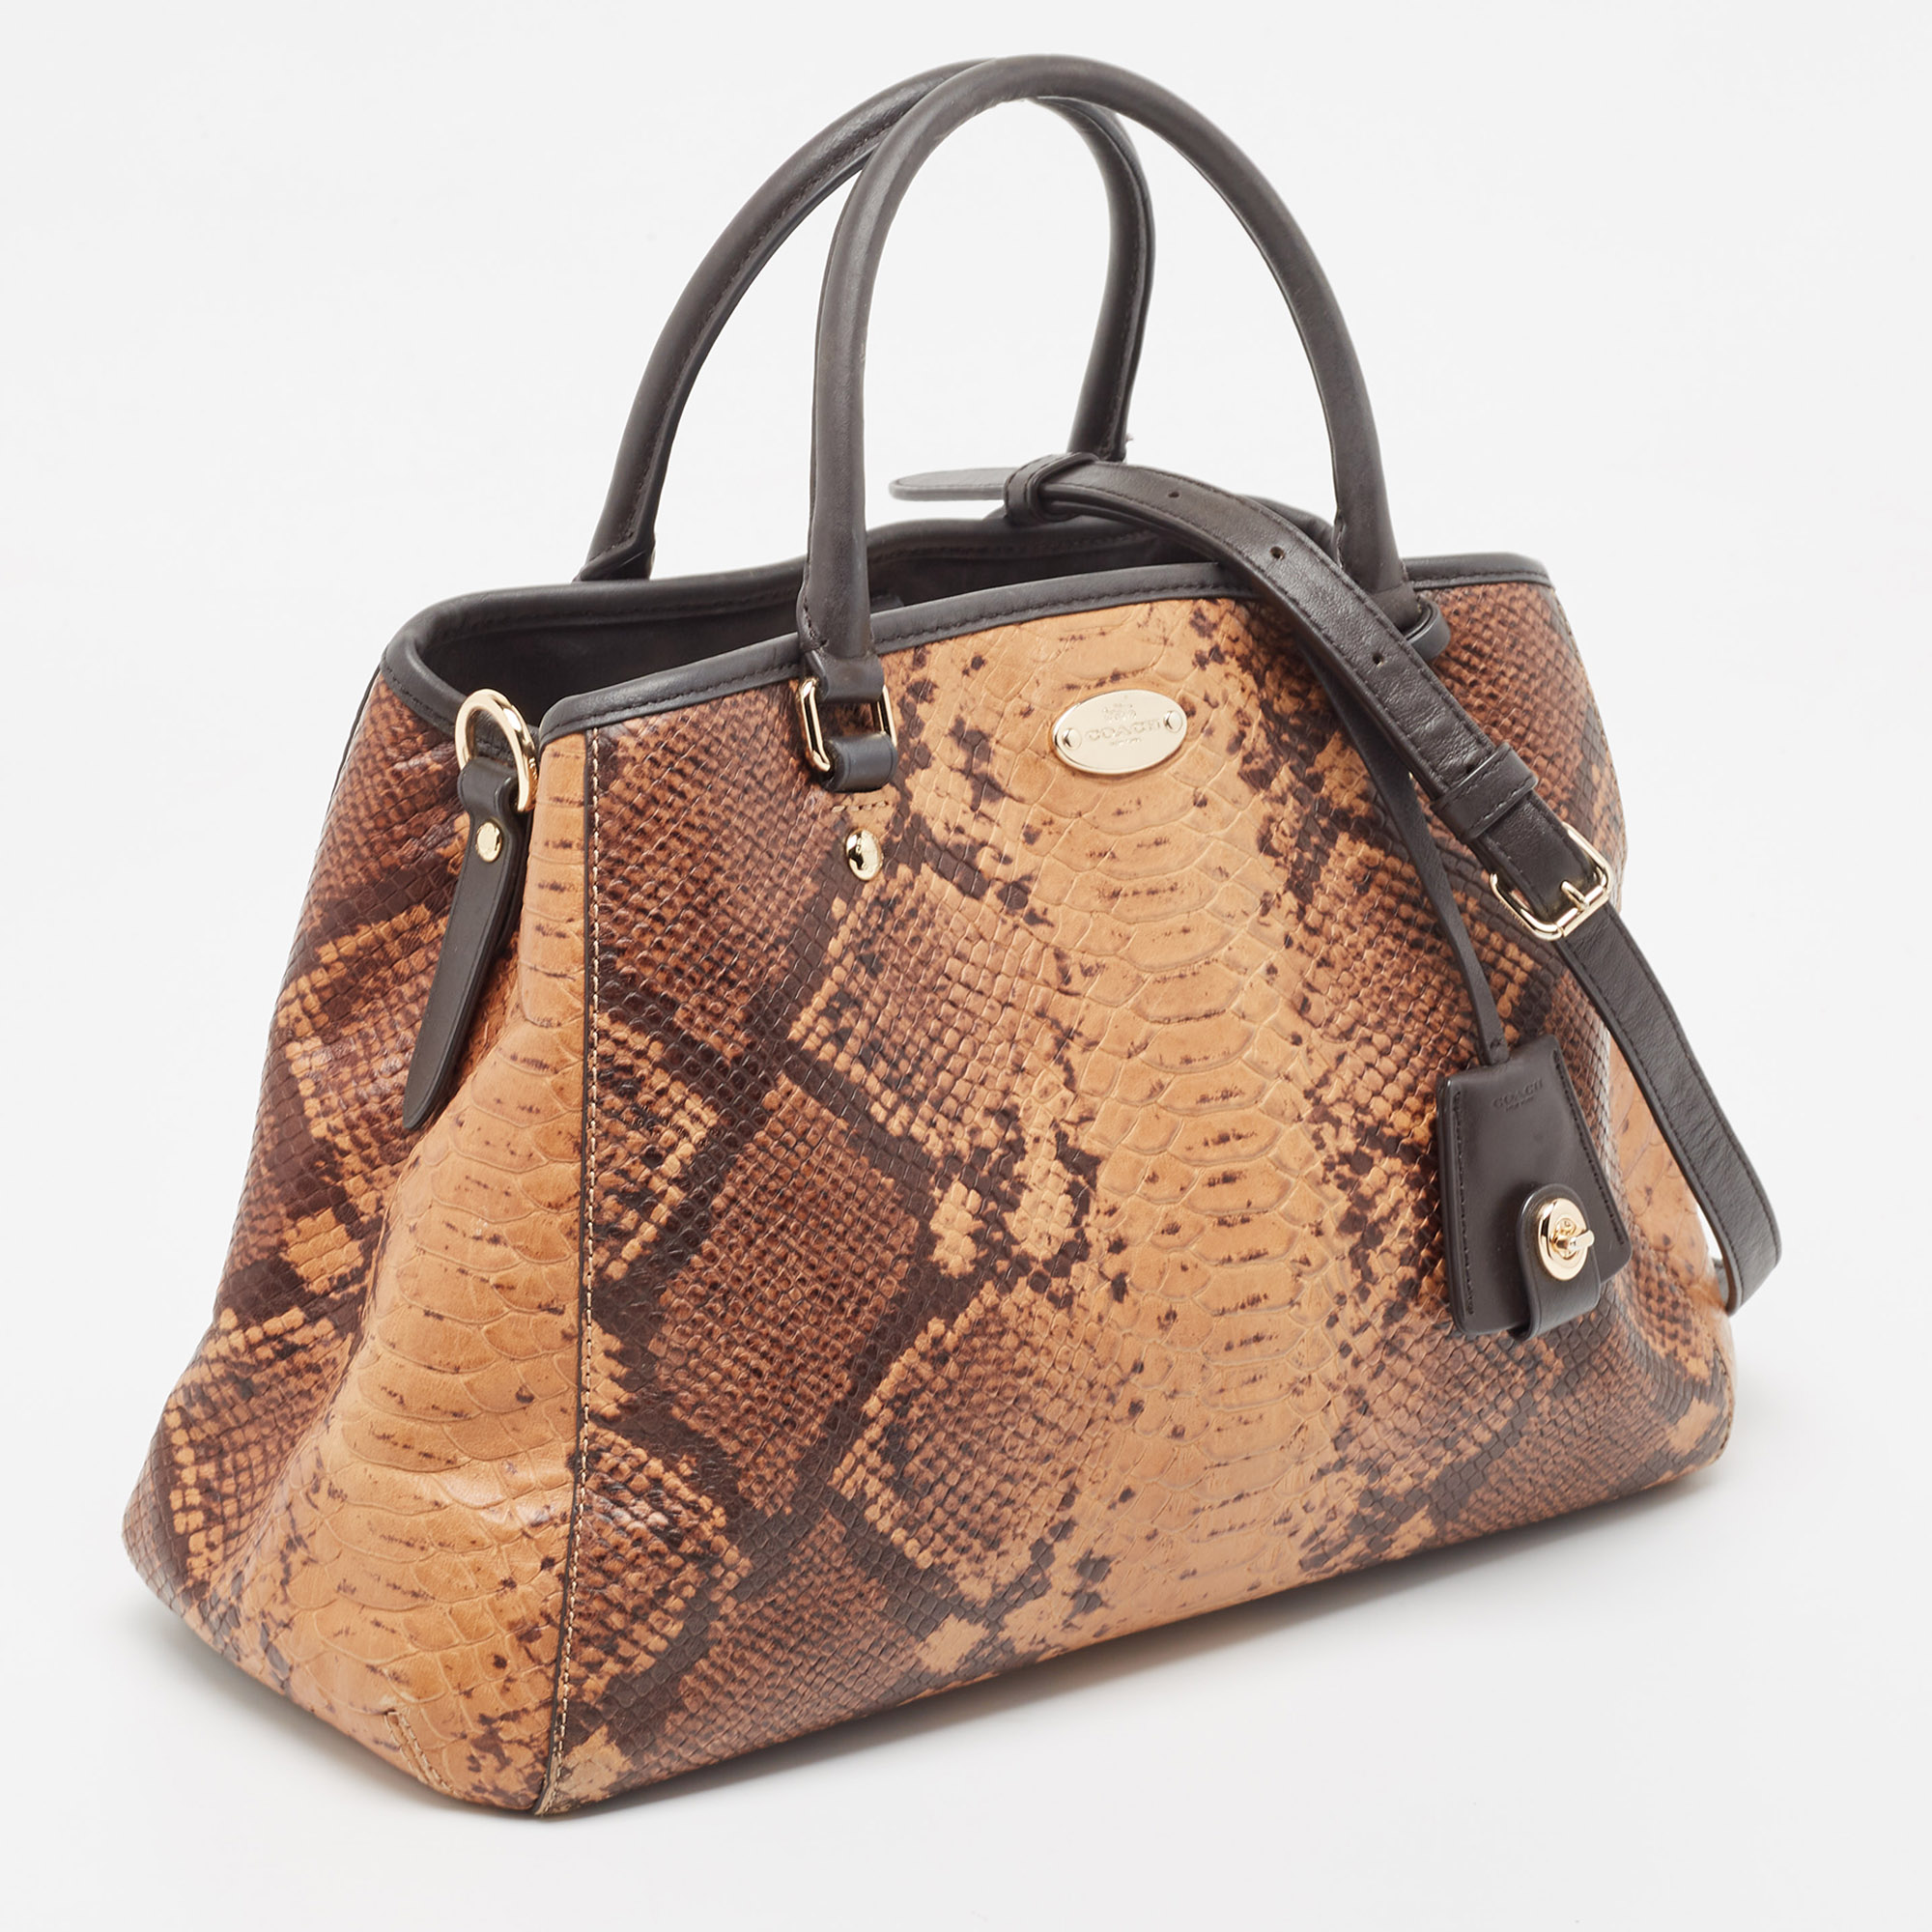 Coach Black/Brown Python Embossed And Leather Margo Carryall Satchel